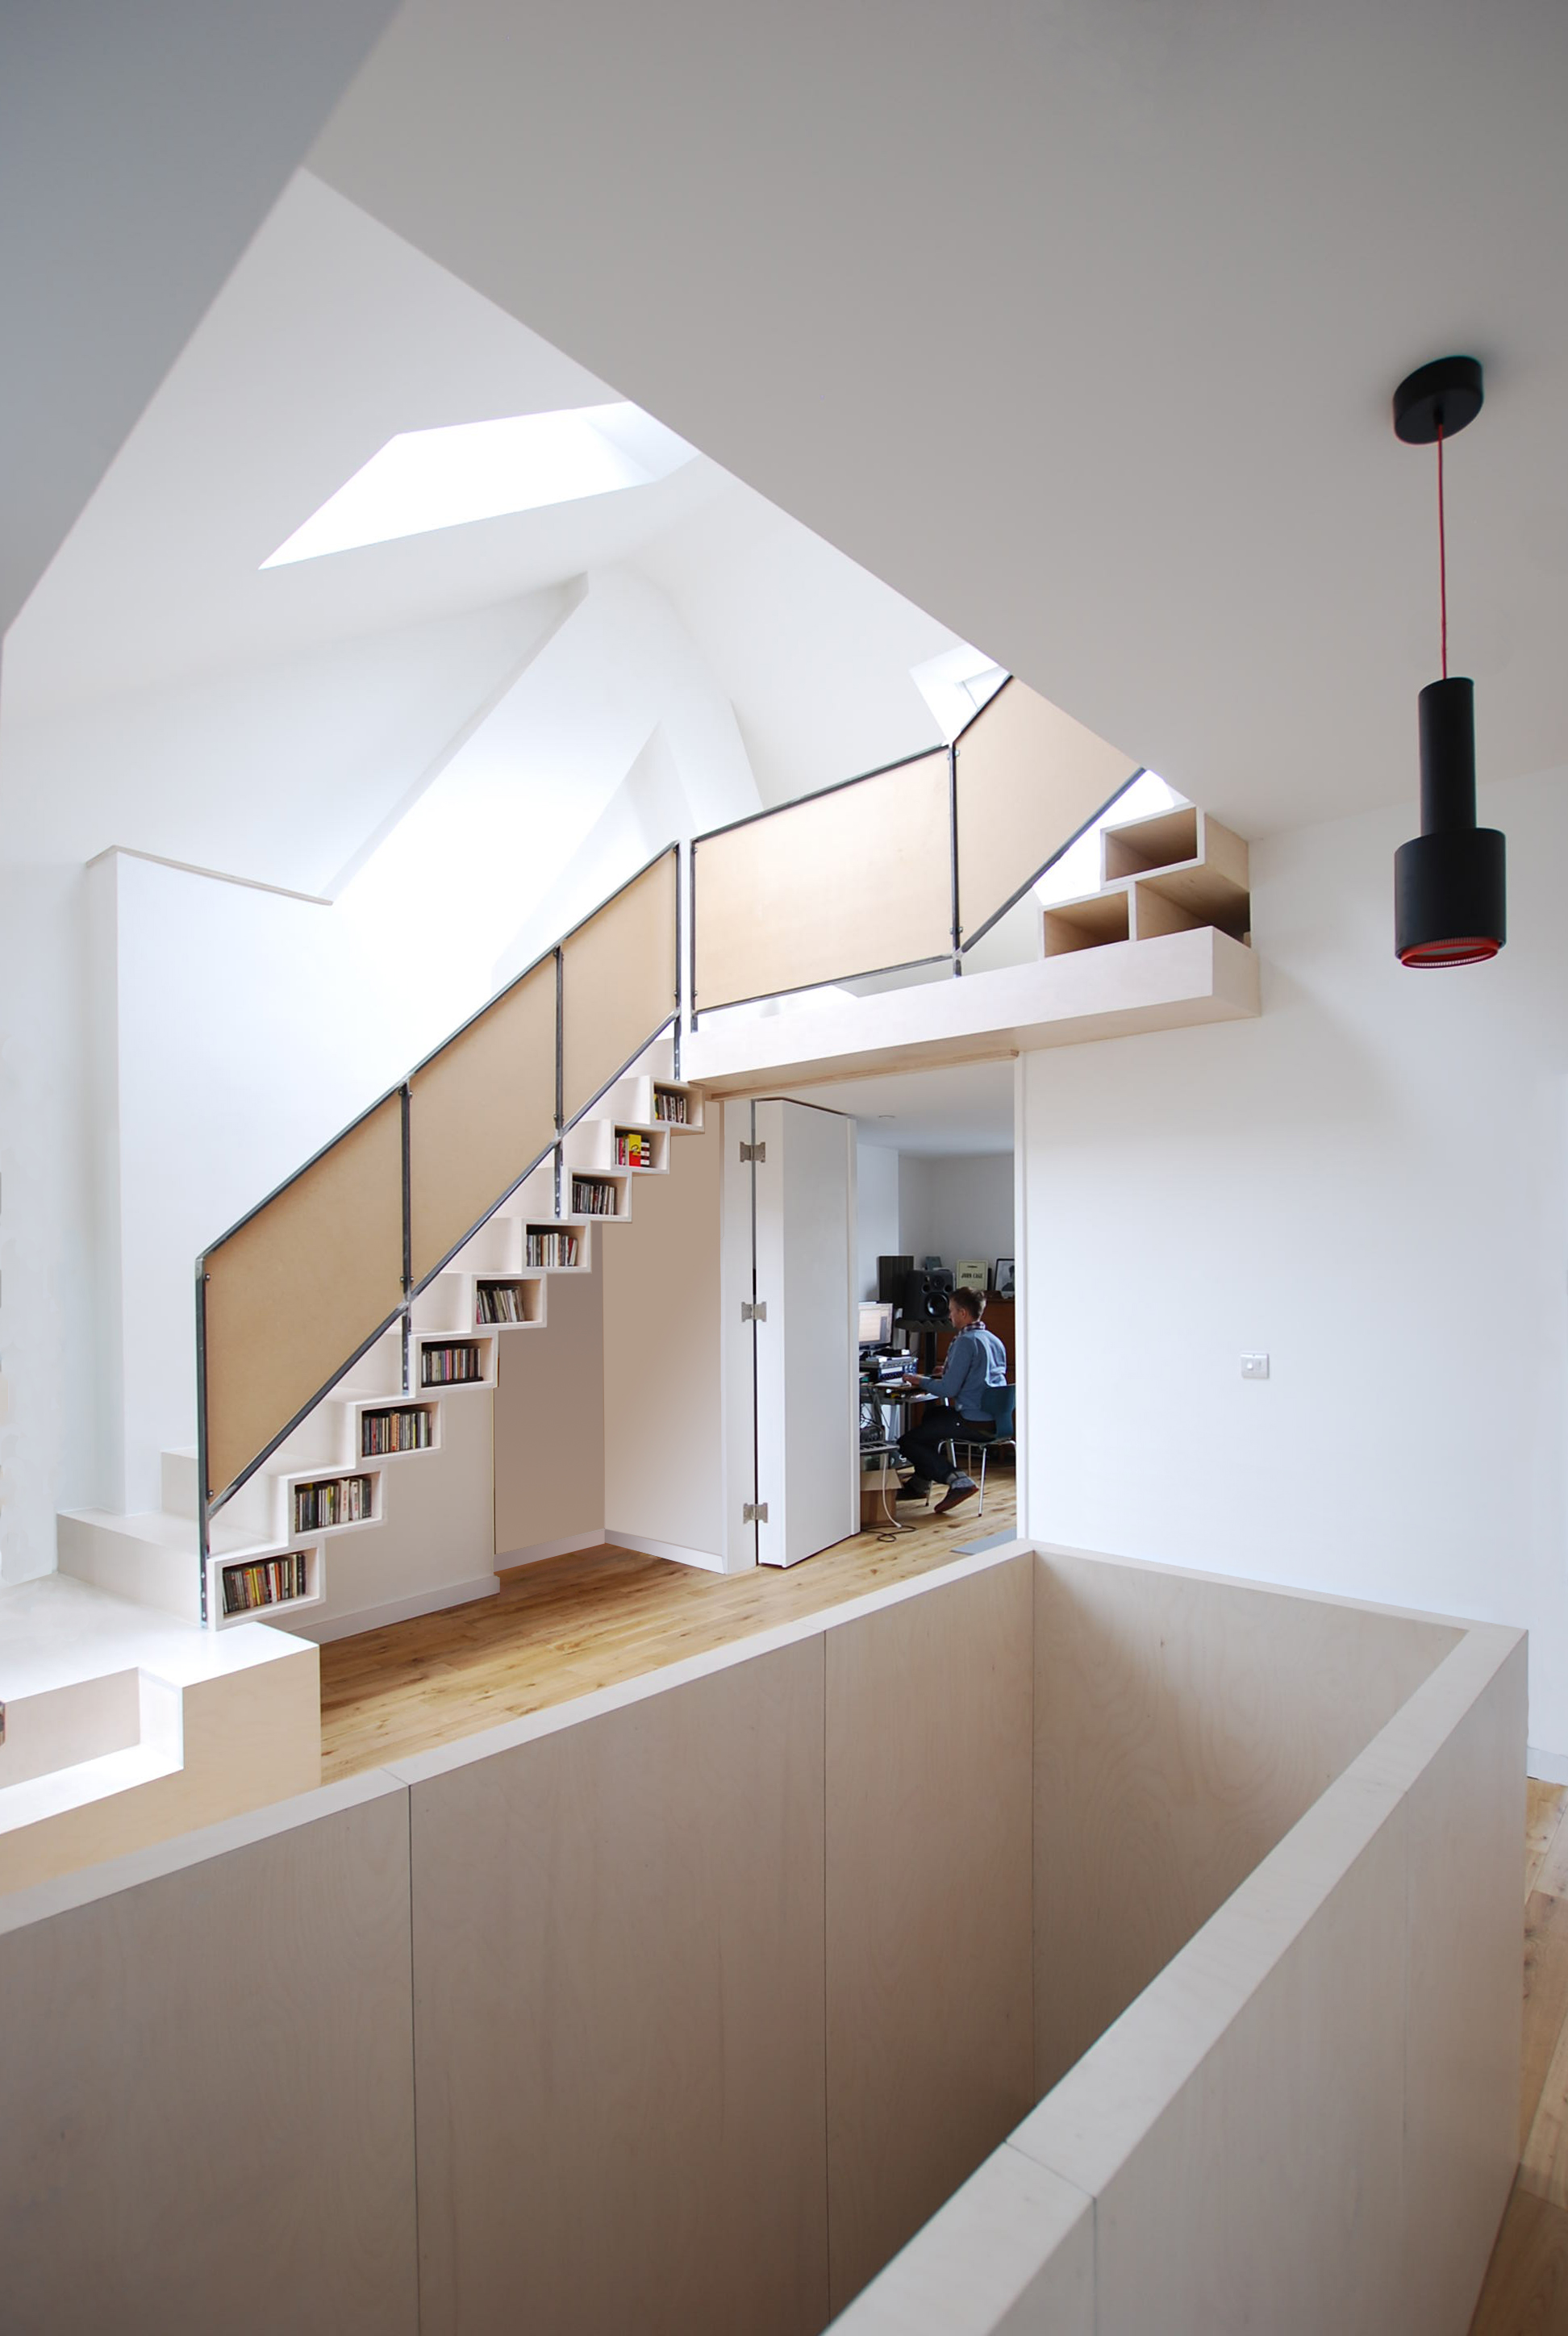 </p> <p>Find your ideal home design pro on designfor-me.com - get matched and see who's interested in your home project. Click image to see more inspiration from our design pros</p> <p>Design by Rory, architect from Tower Hamlets, London</p> <p>#architecture #homedesign #modernhomes #homeinspiration #hallways #hallwaydesign #hallwayinspiration #hallwayideas #hallwaydesignideas #staircases #staircasedesign #staircaseinspiration #staircaseideas #staircasedesignideas </p> <p>